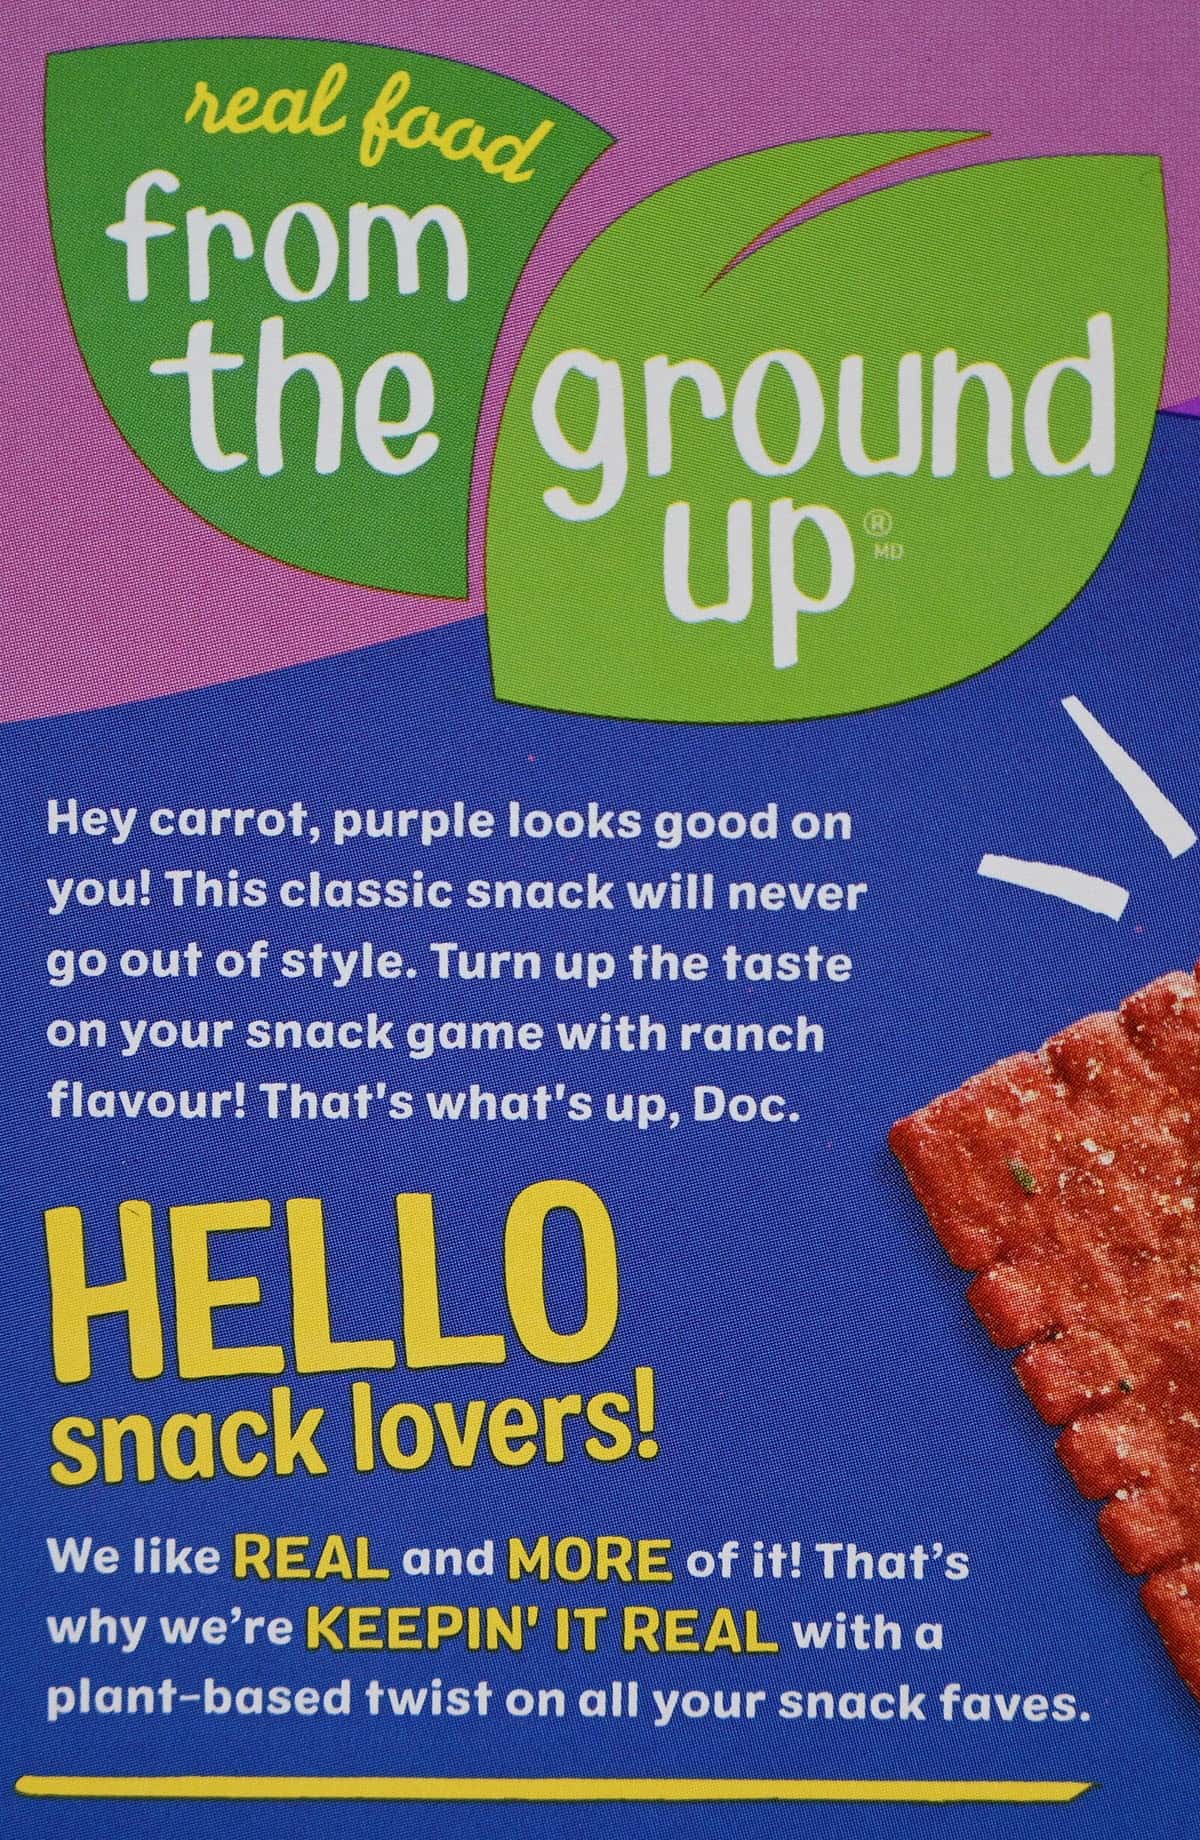 Costco From The Ground Up Purple Carrot Crackers company description from the box. 